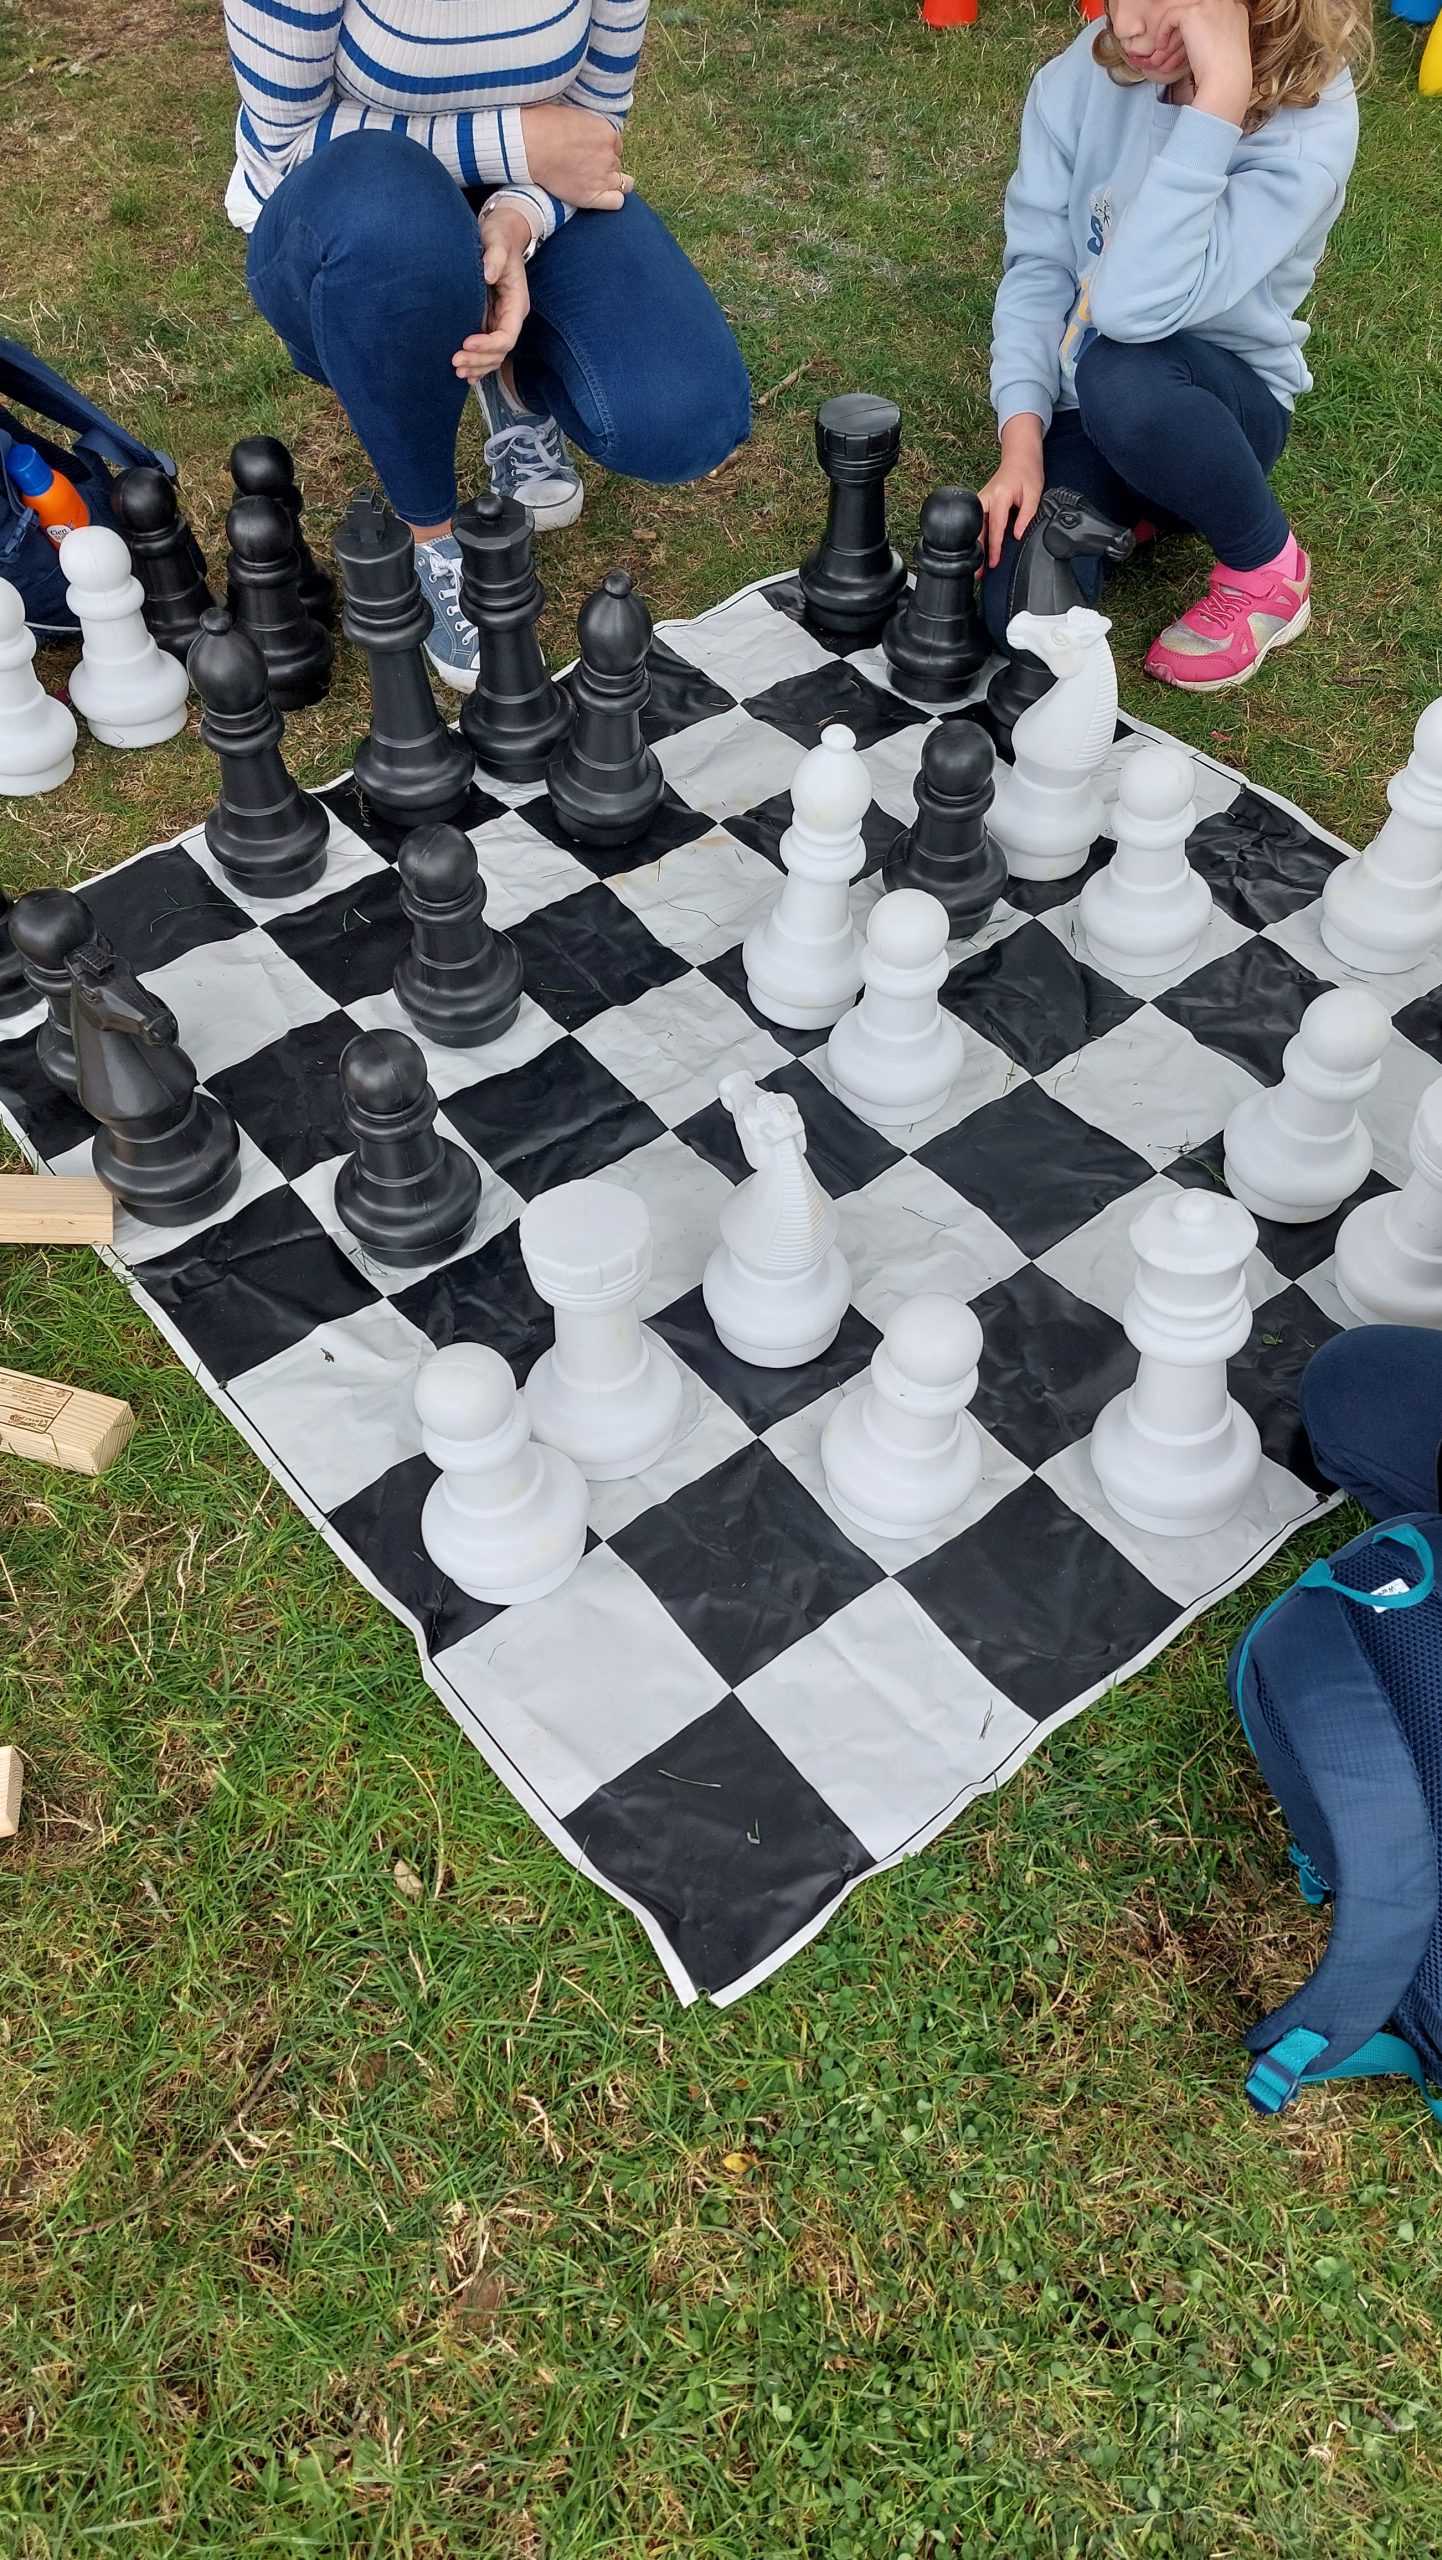 a giant chess game being played by adults and children